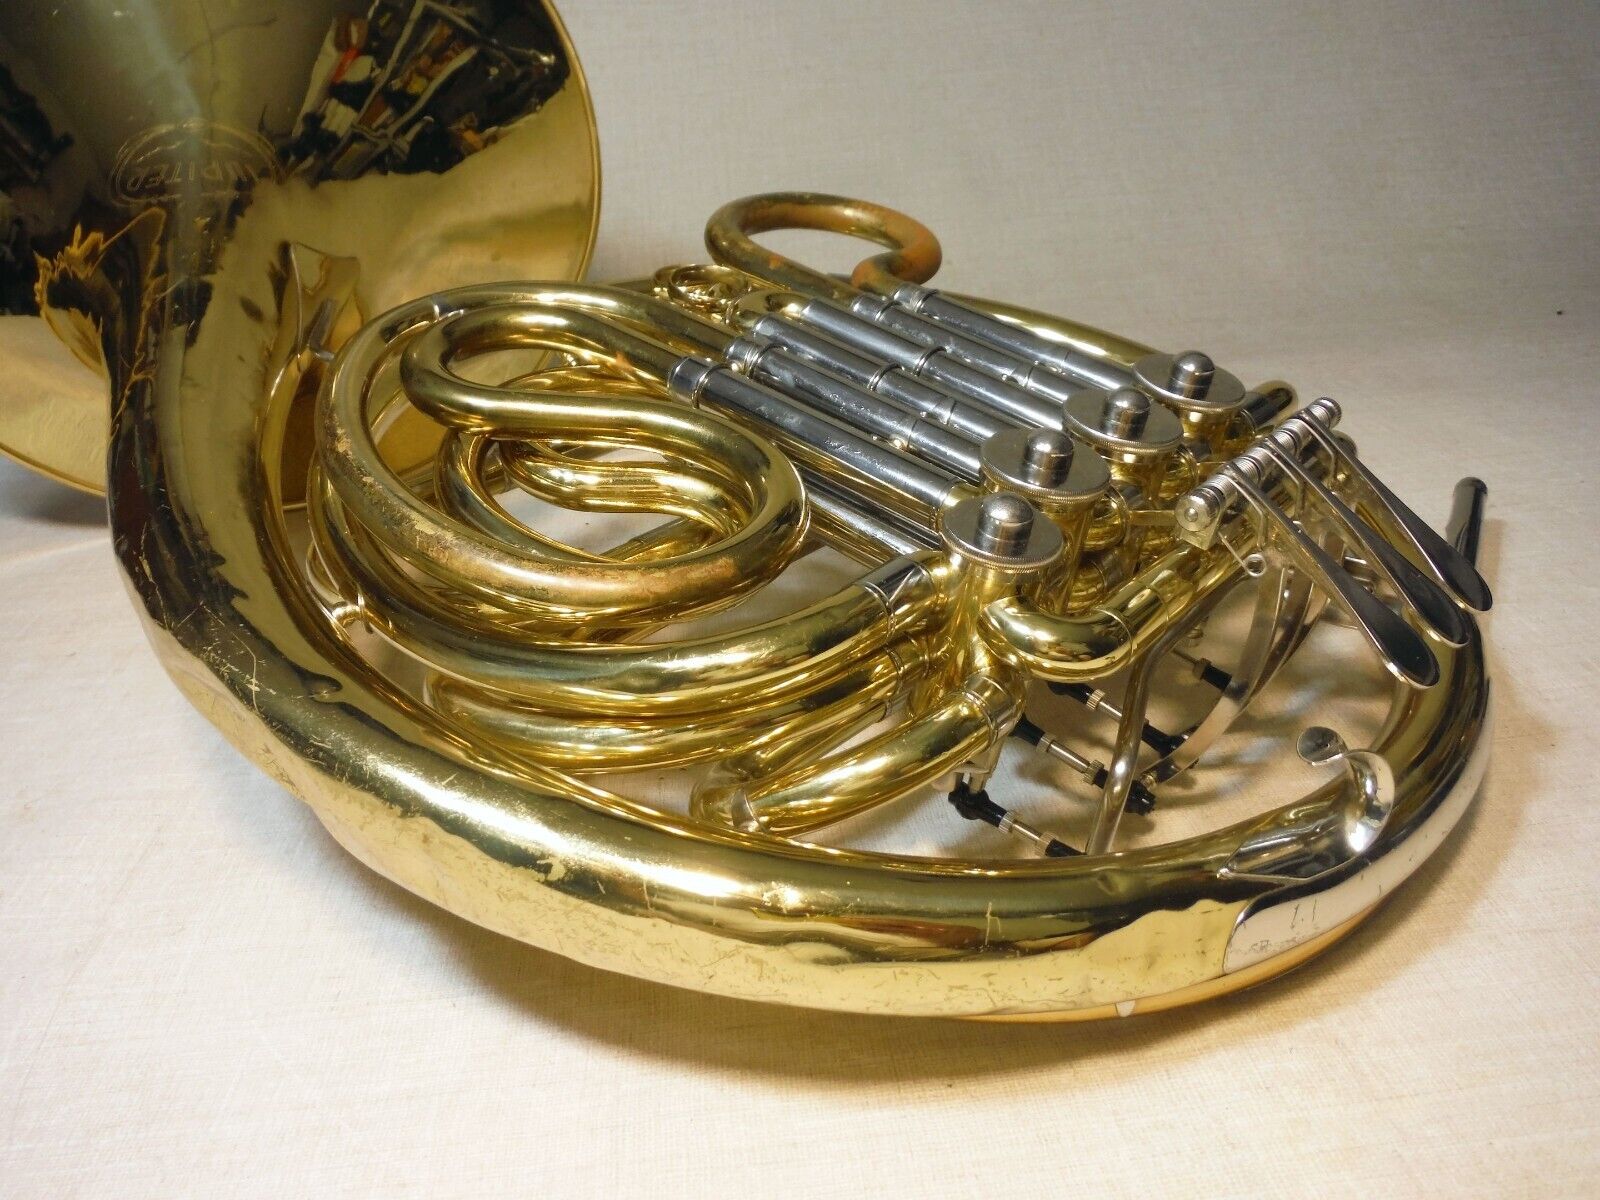 JUPITER JHR-852 DOUBLE FRENCH HORN BRASS WORKING GOOD W/DENTS CASE MOUTHPIECE 10